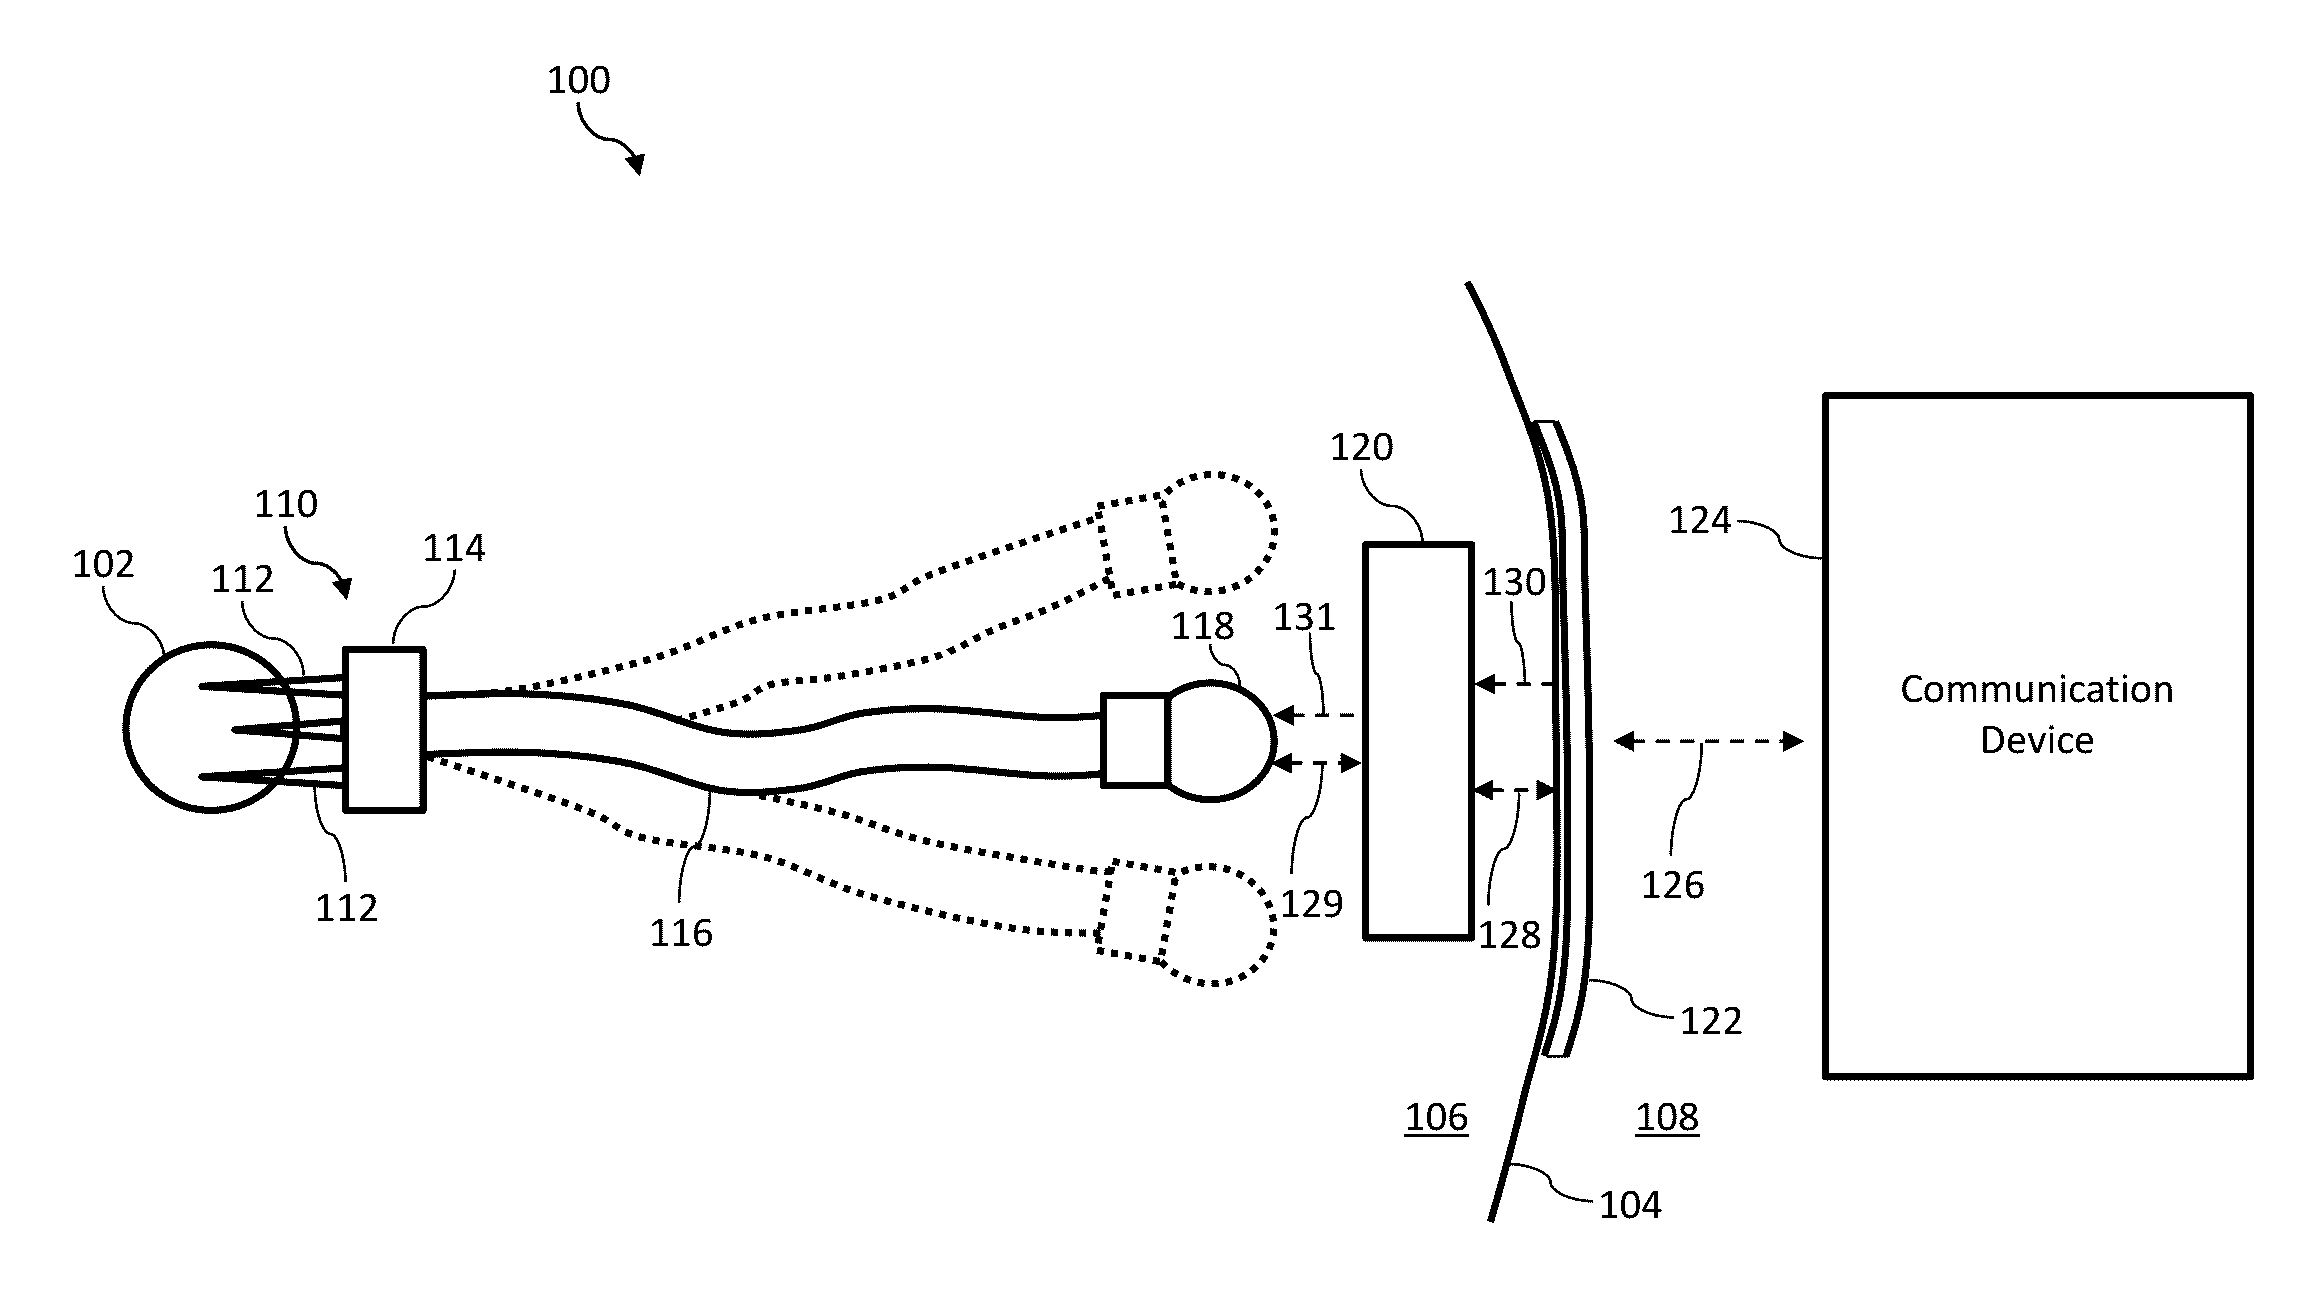 Optically based devices, systems, and methods for neuromodulation stimulation and monitoring